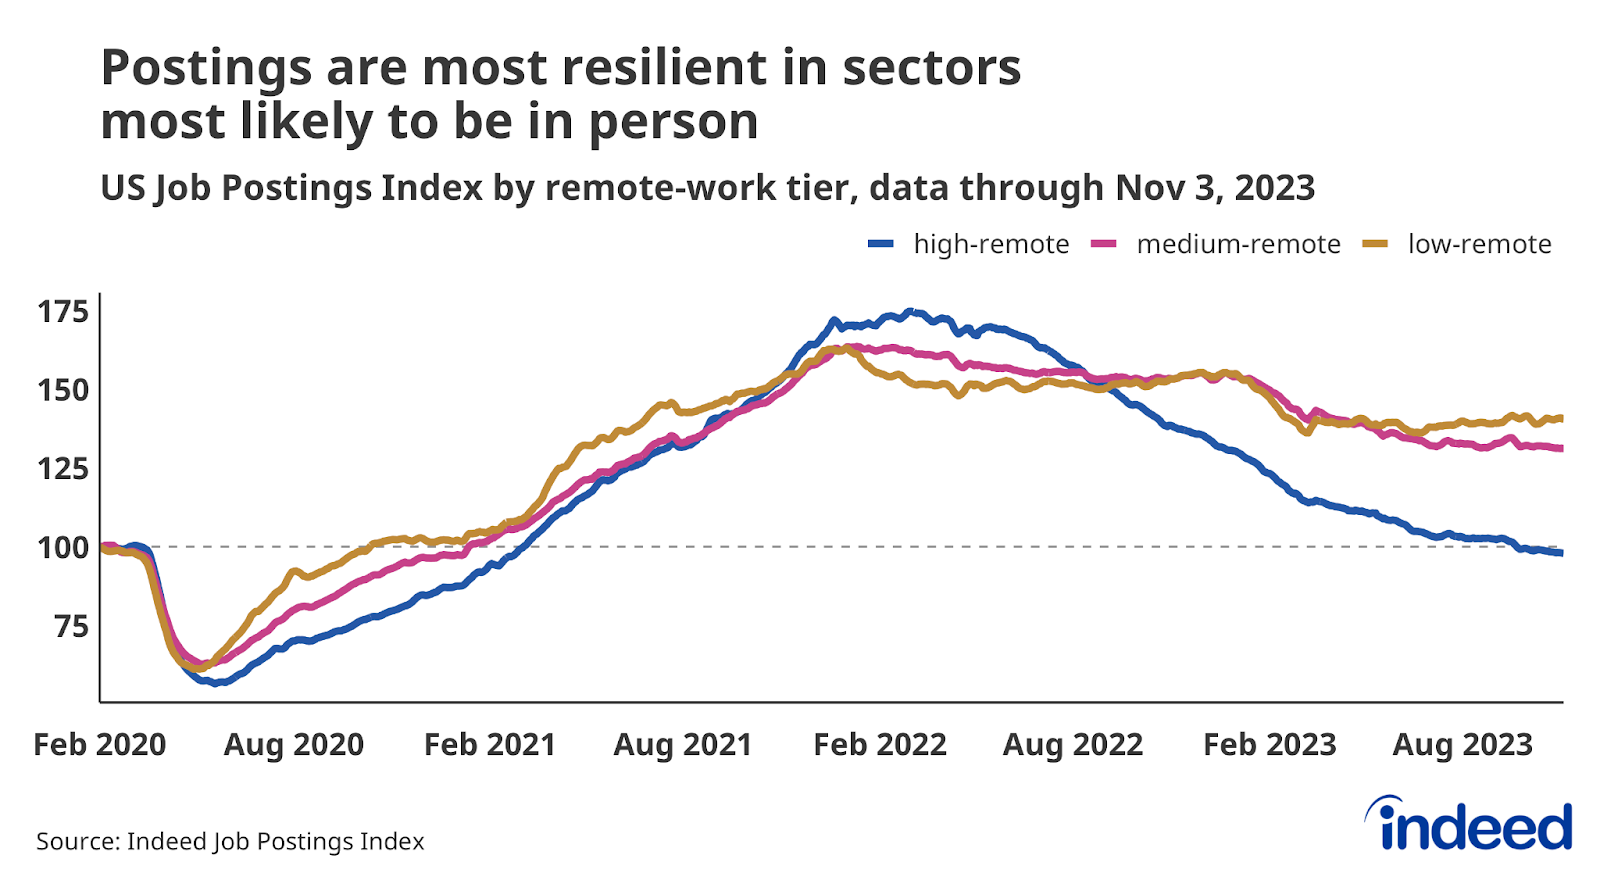 A line graph titled “Postings are most resilient in sectors most likely to be in person” shows trends in the Indeed Job Postings Index by remote work tier. Sectors more likely to advertise remote work have seen job postings slip more since 2022.